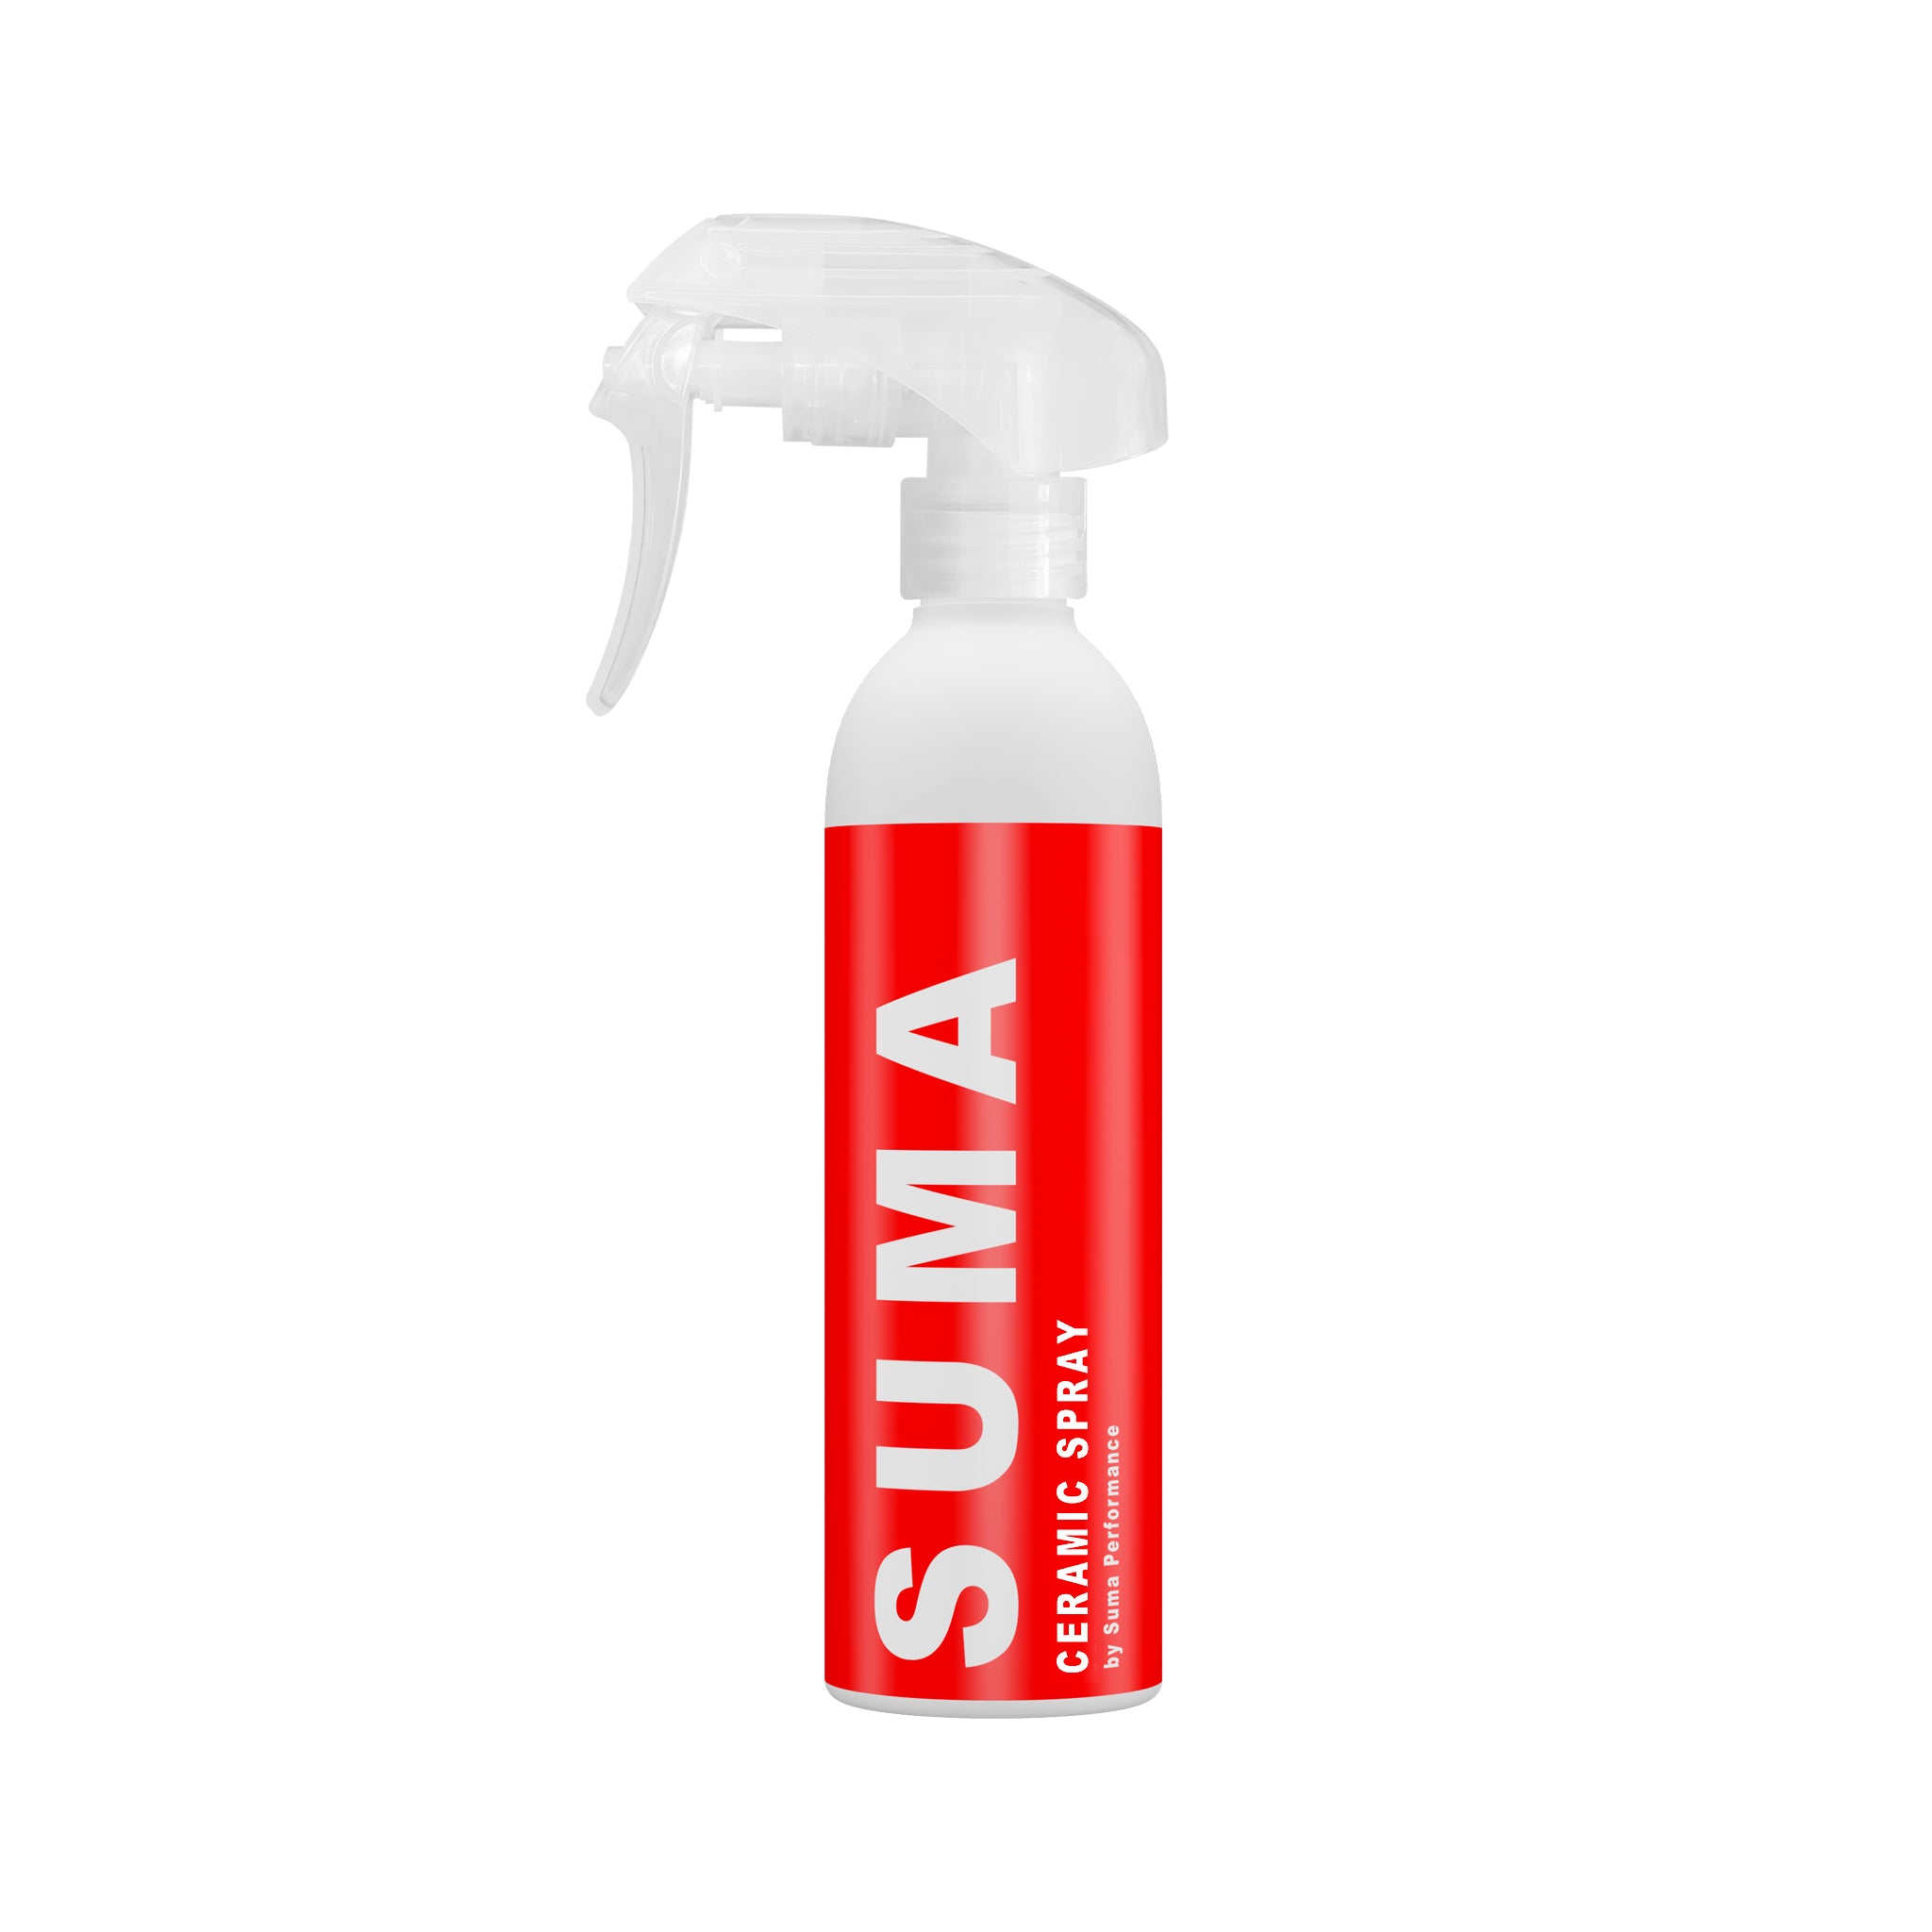 Ceramic Spray Coating 60 Ml Home Ceramic Coating Spray Multifunctional Easy  Use Kitchen Cleaner For Porcelain Marble Stainless